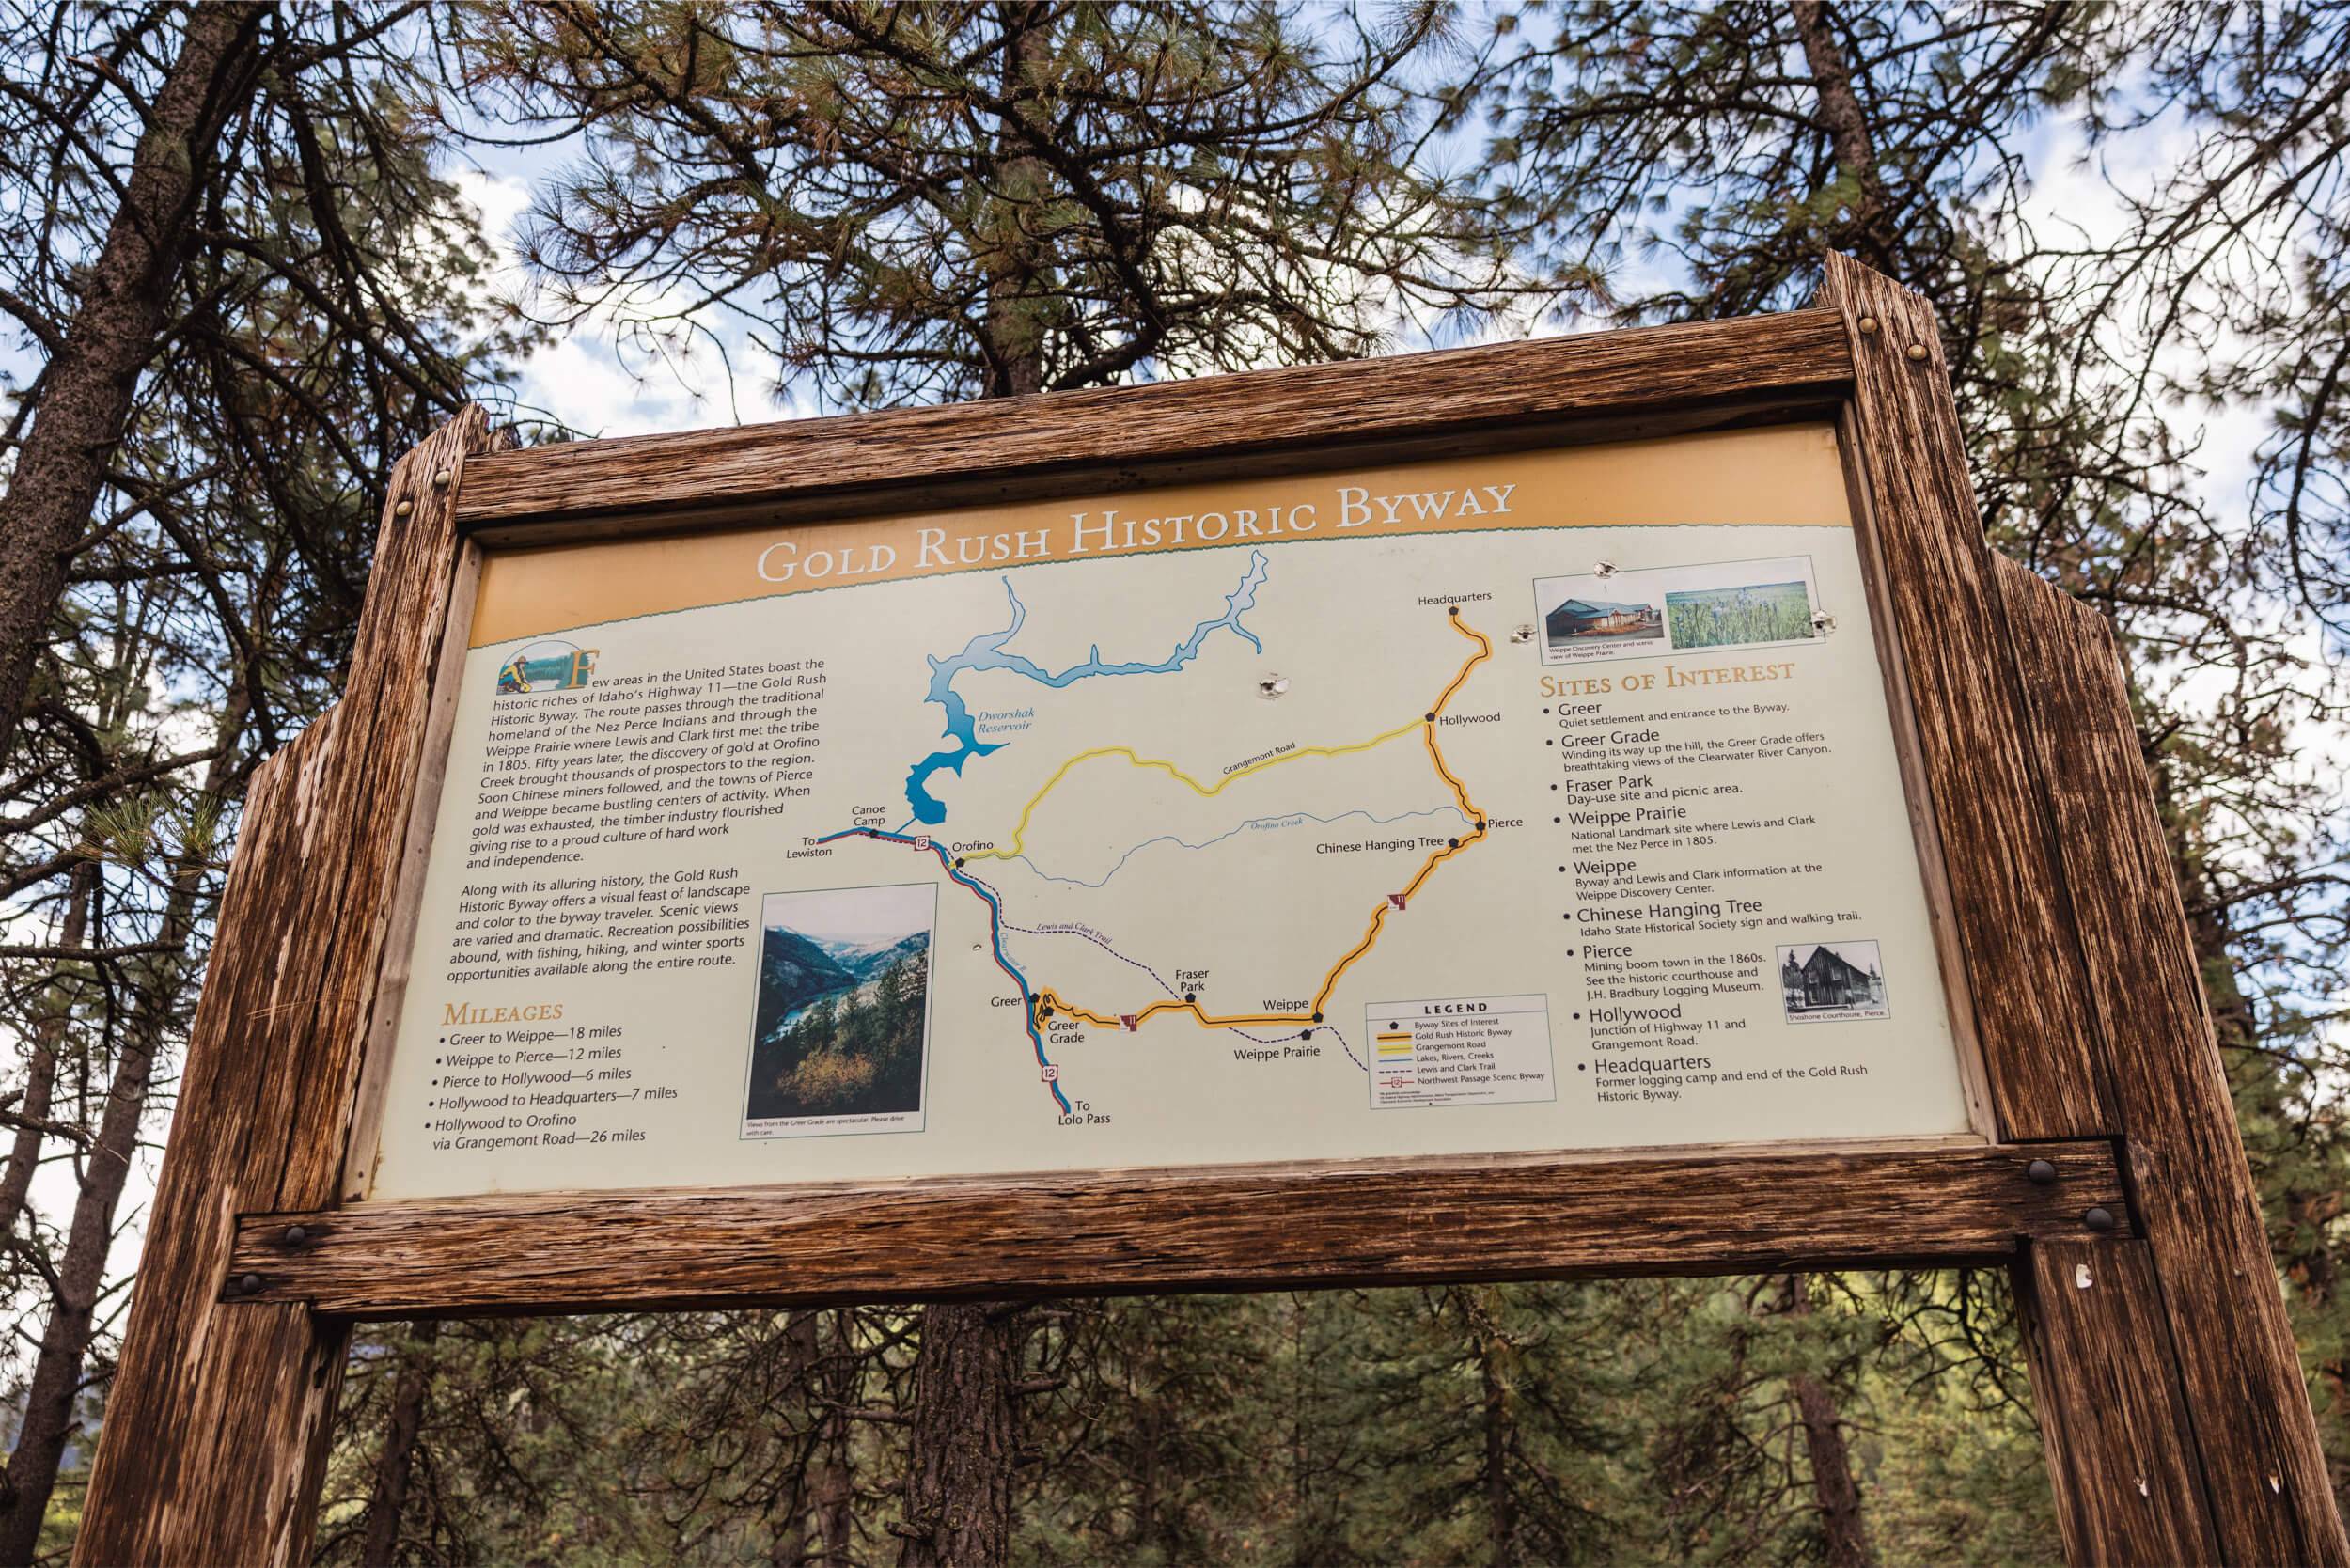 A wooden sign for Gold Rush Historic Byway.